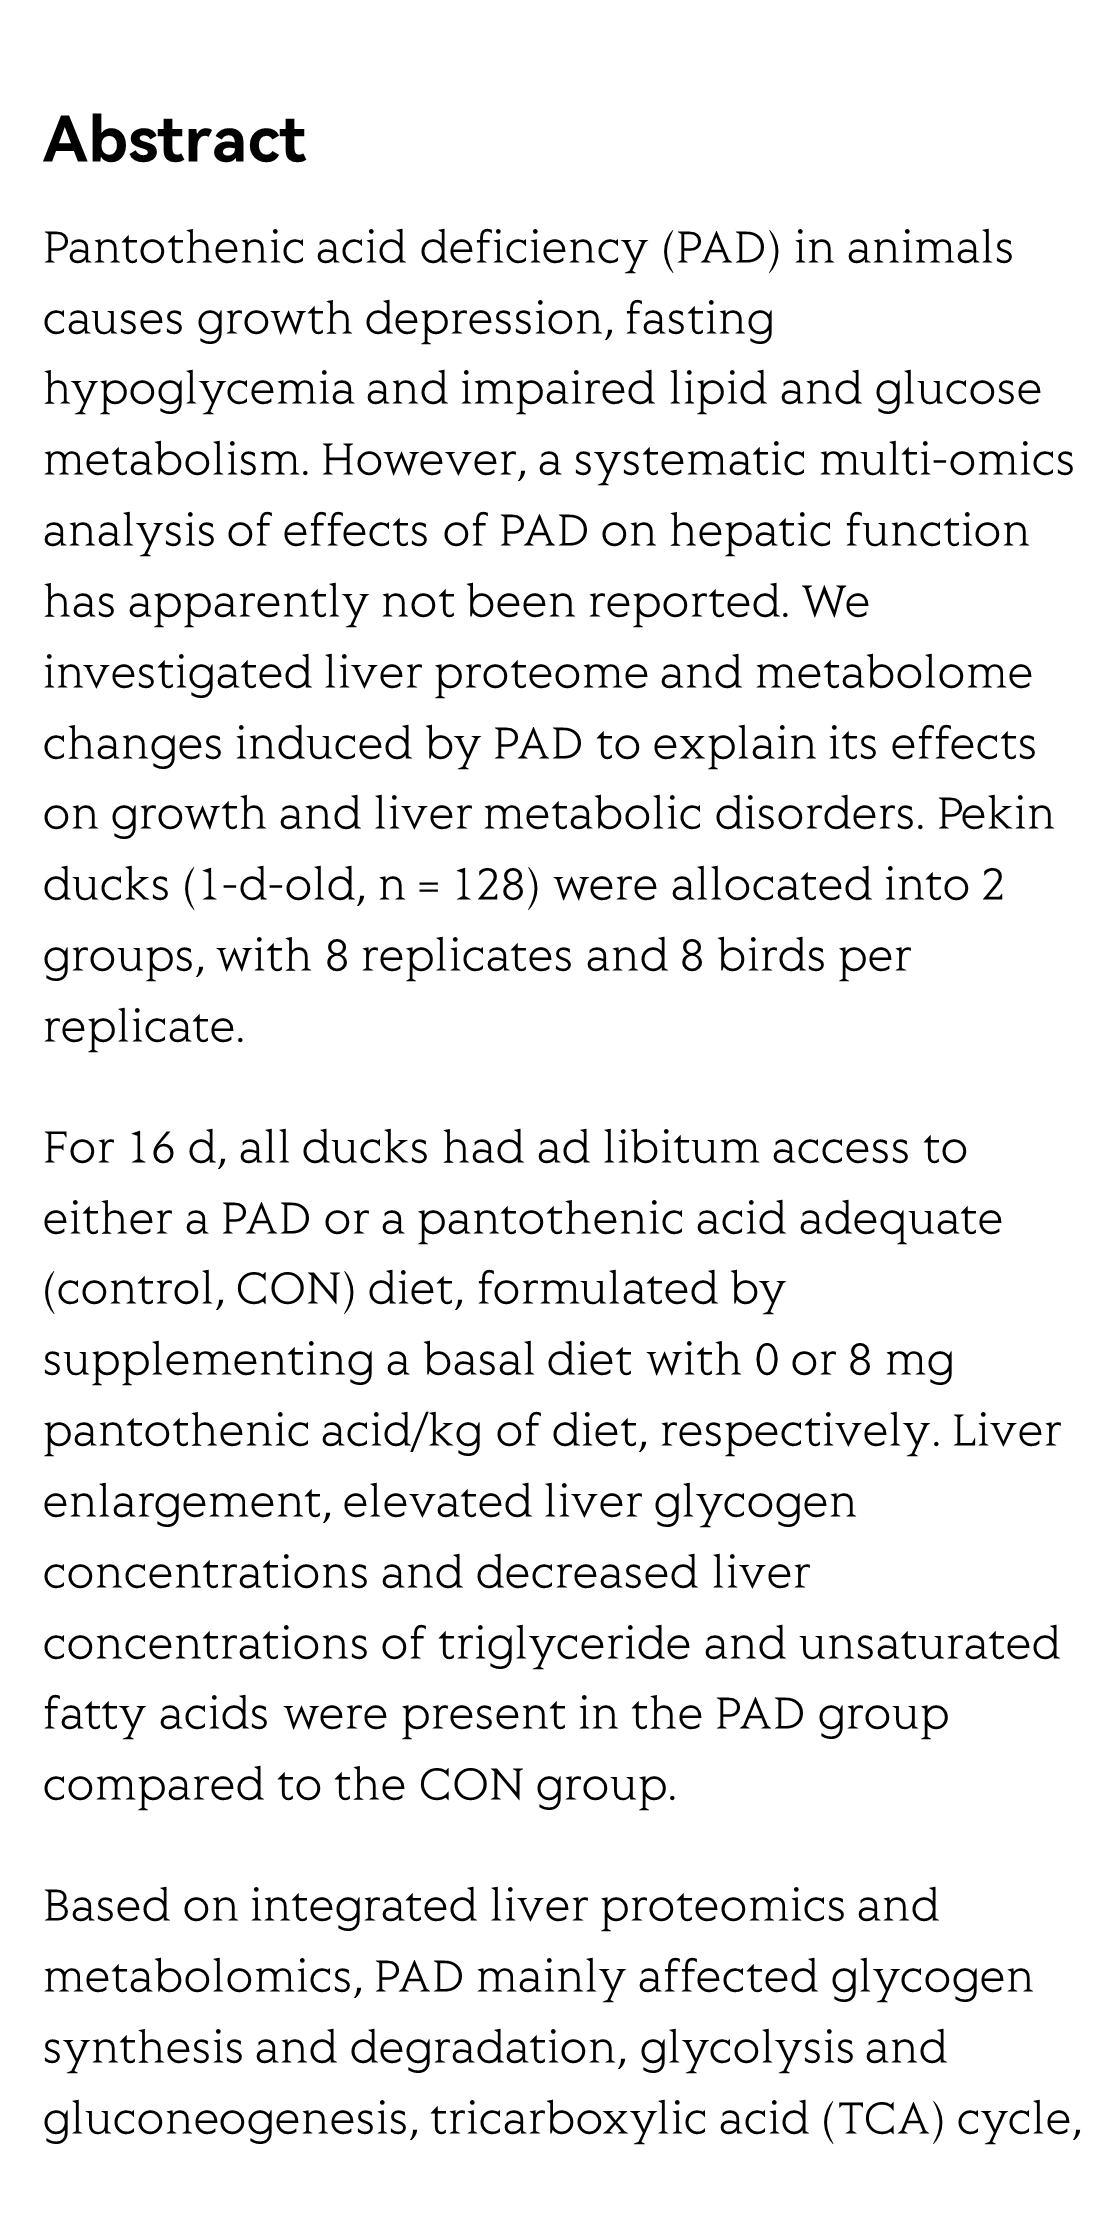 Integrated liver proteomics and metabolomics identify metabolic pathways affected by pantothenic acid deficiency in Pekin ducks_2